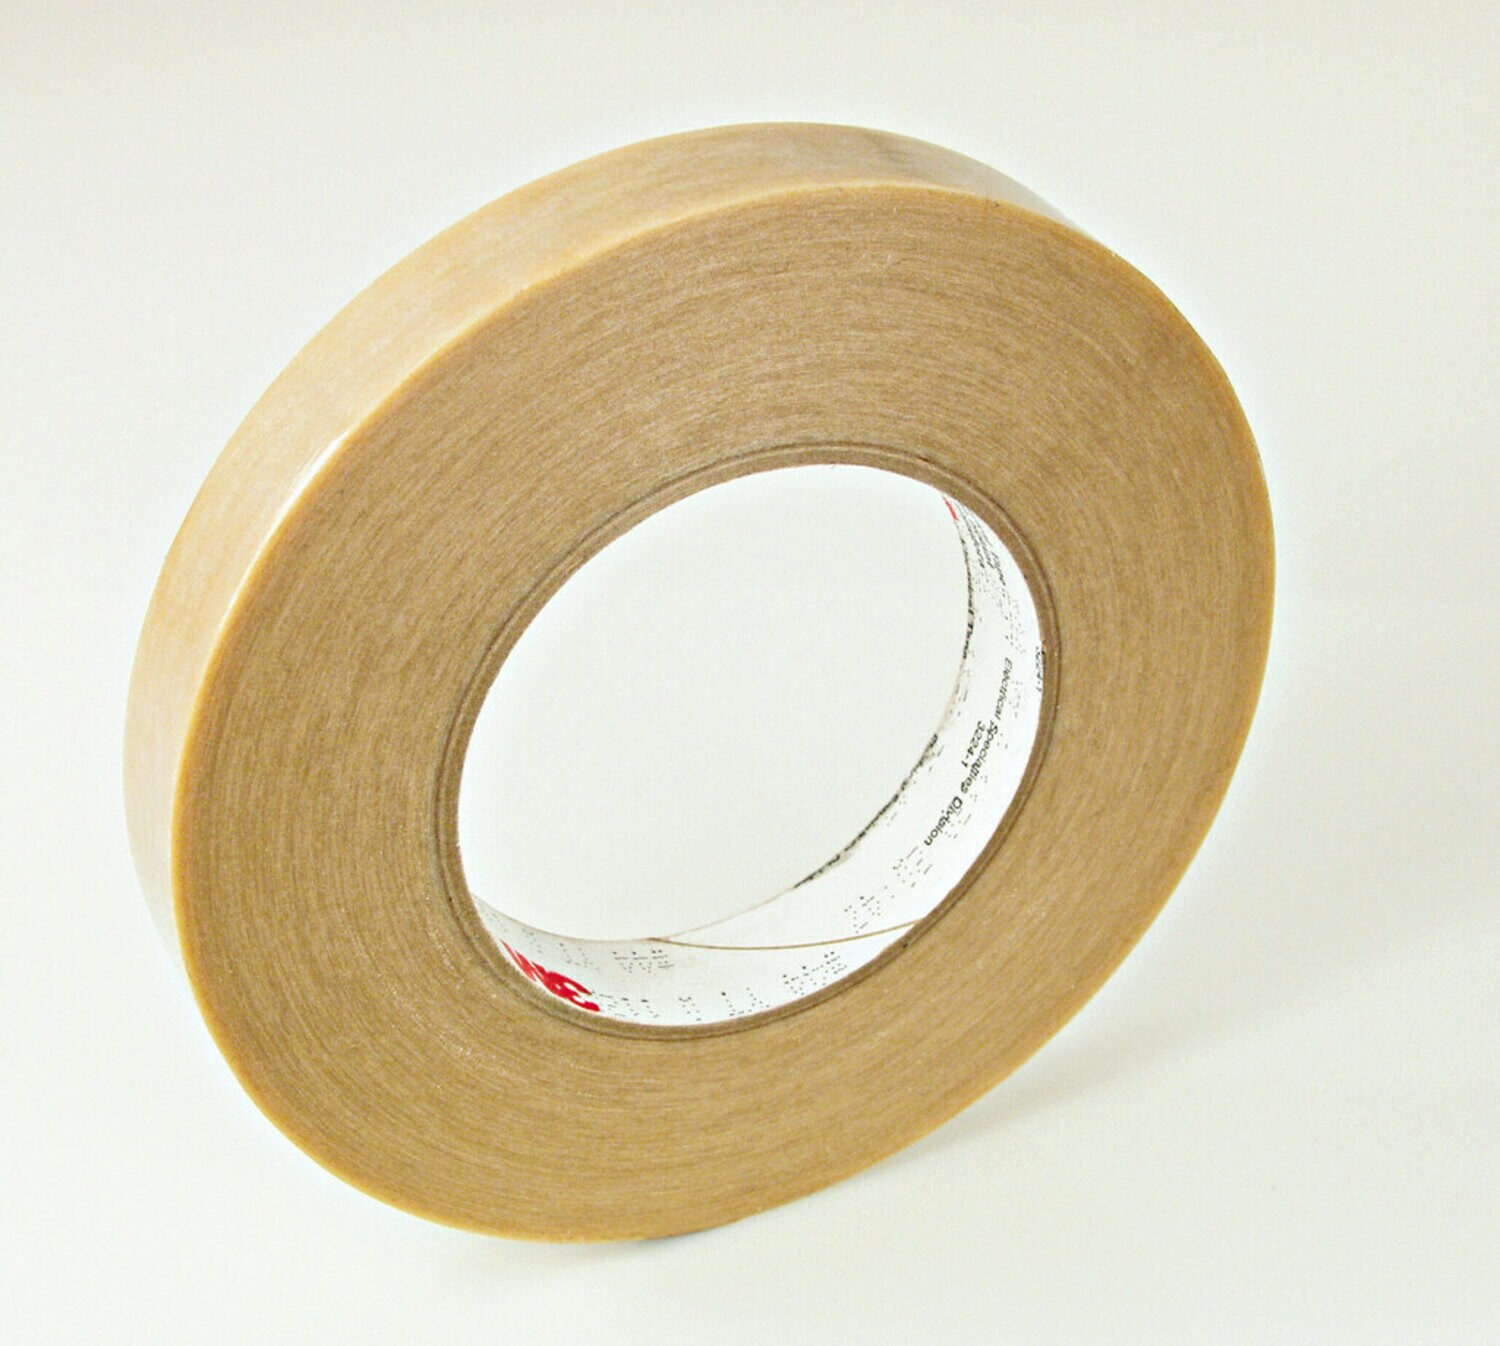 7010349800 - 3M Composite Film Electrical Tape 44, 23-1/2 x 120 yd, 3 in Paper Core,
Log Roll, 1 Roll/Case